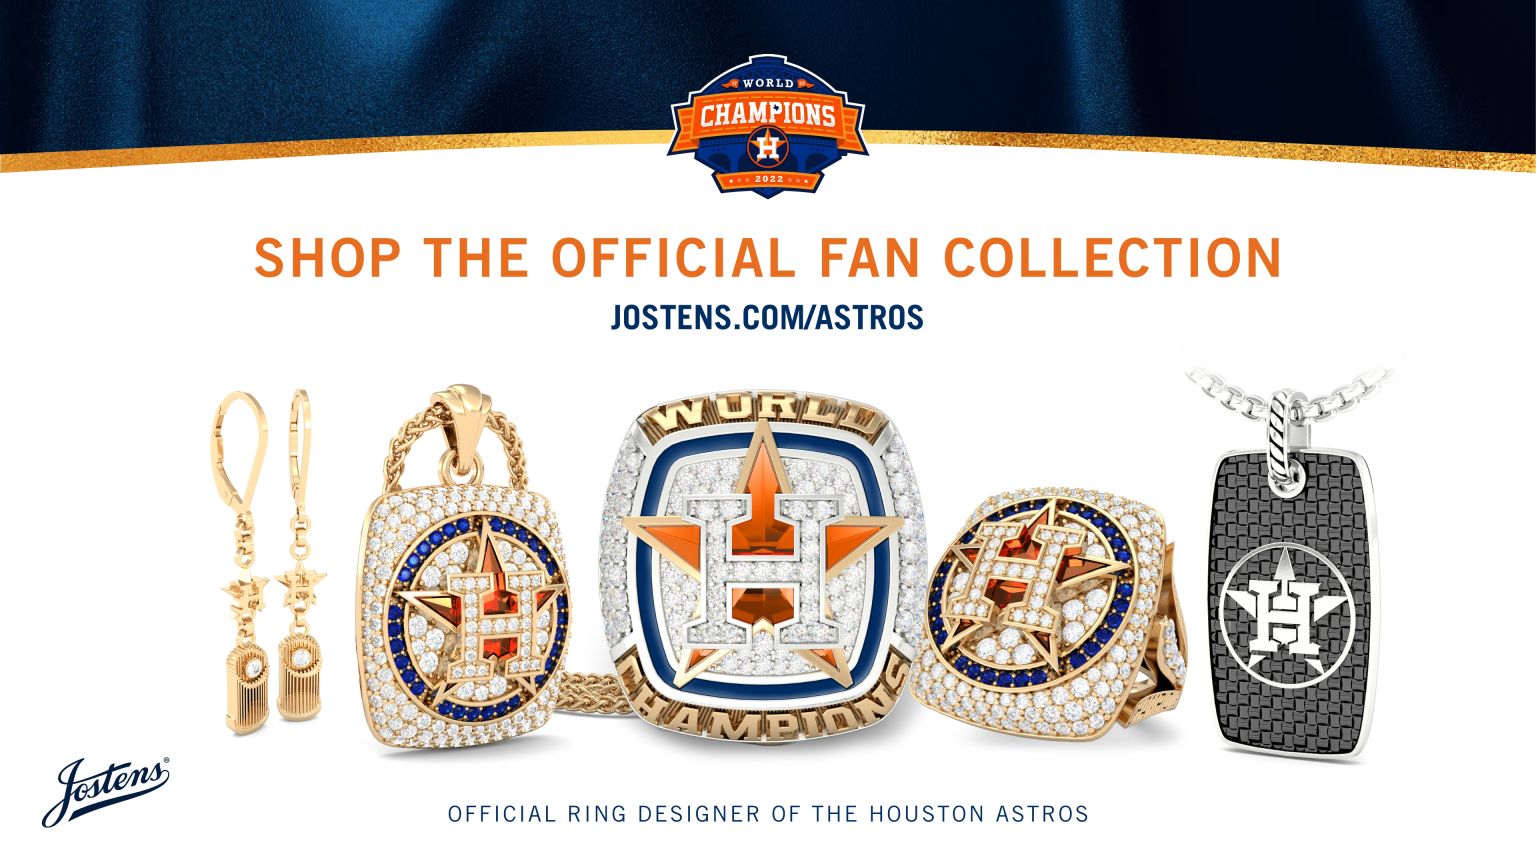 Houston Astros 2017 World Series Rings Details and Symbolism